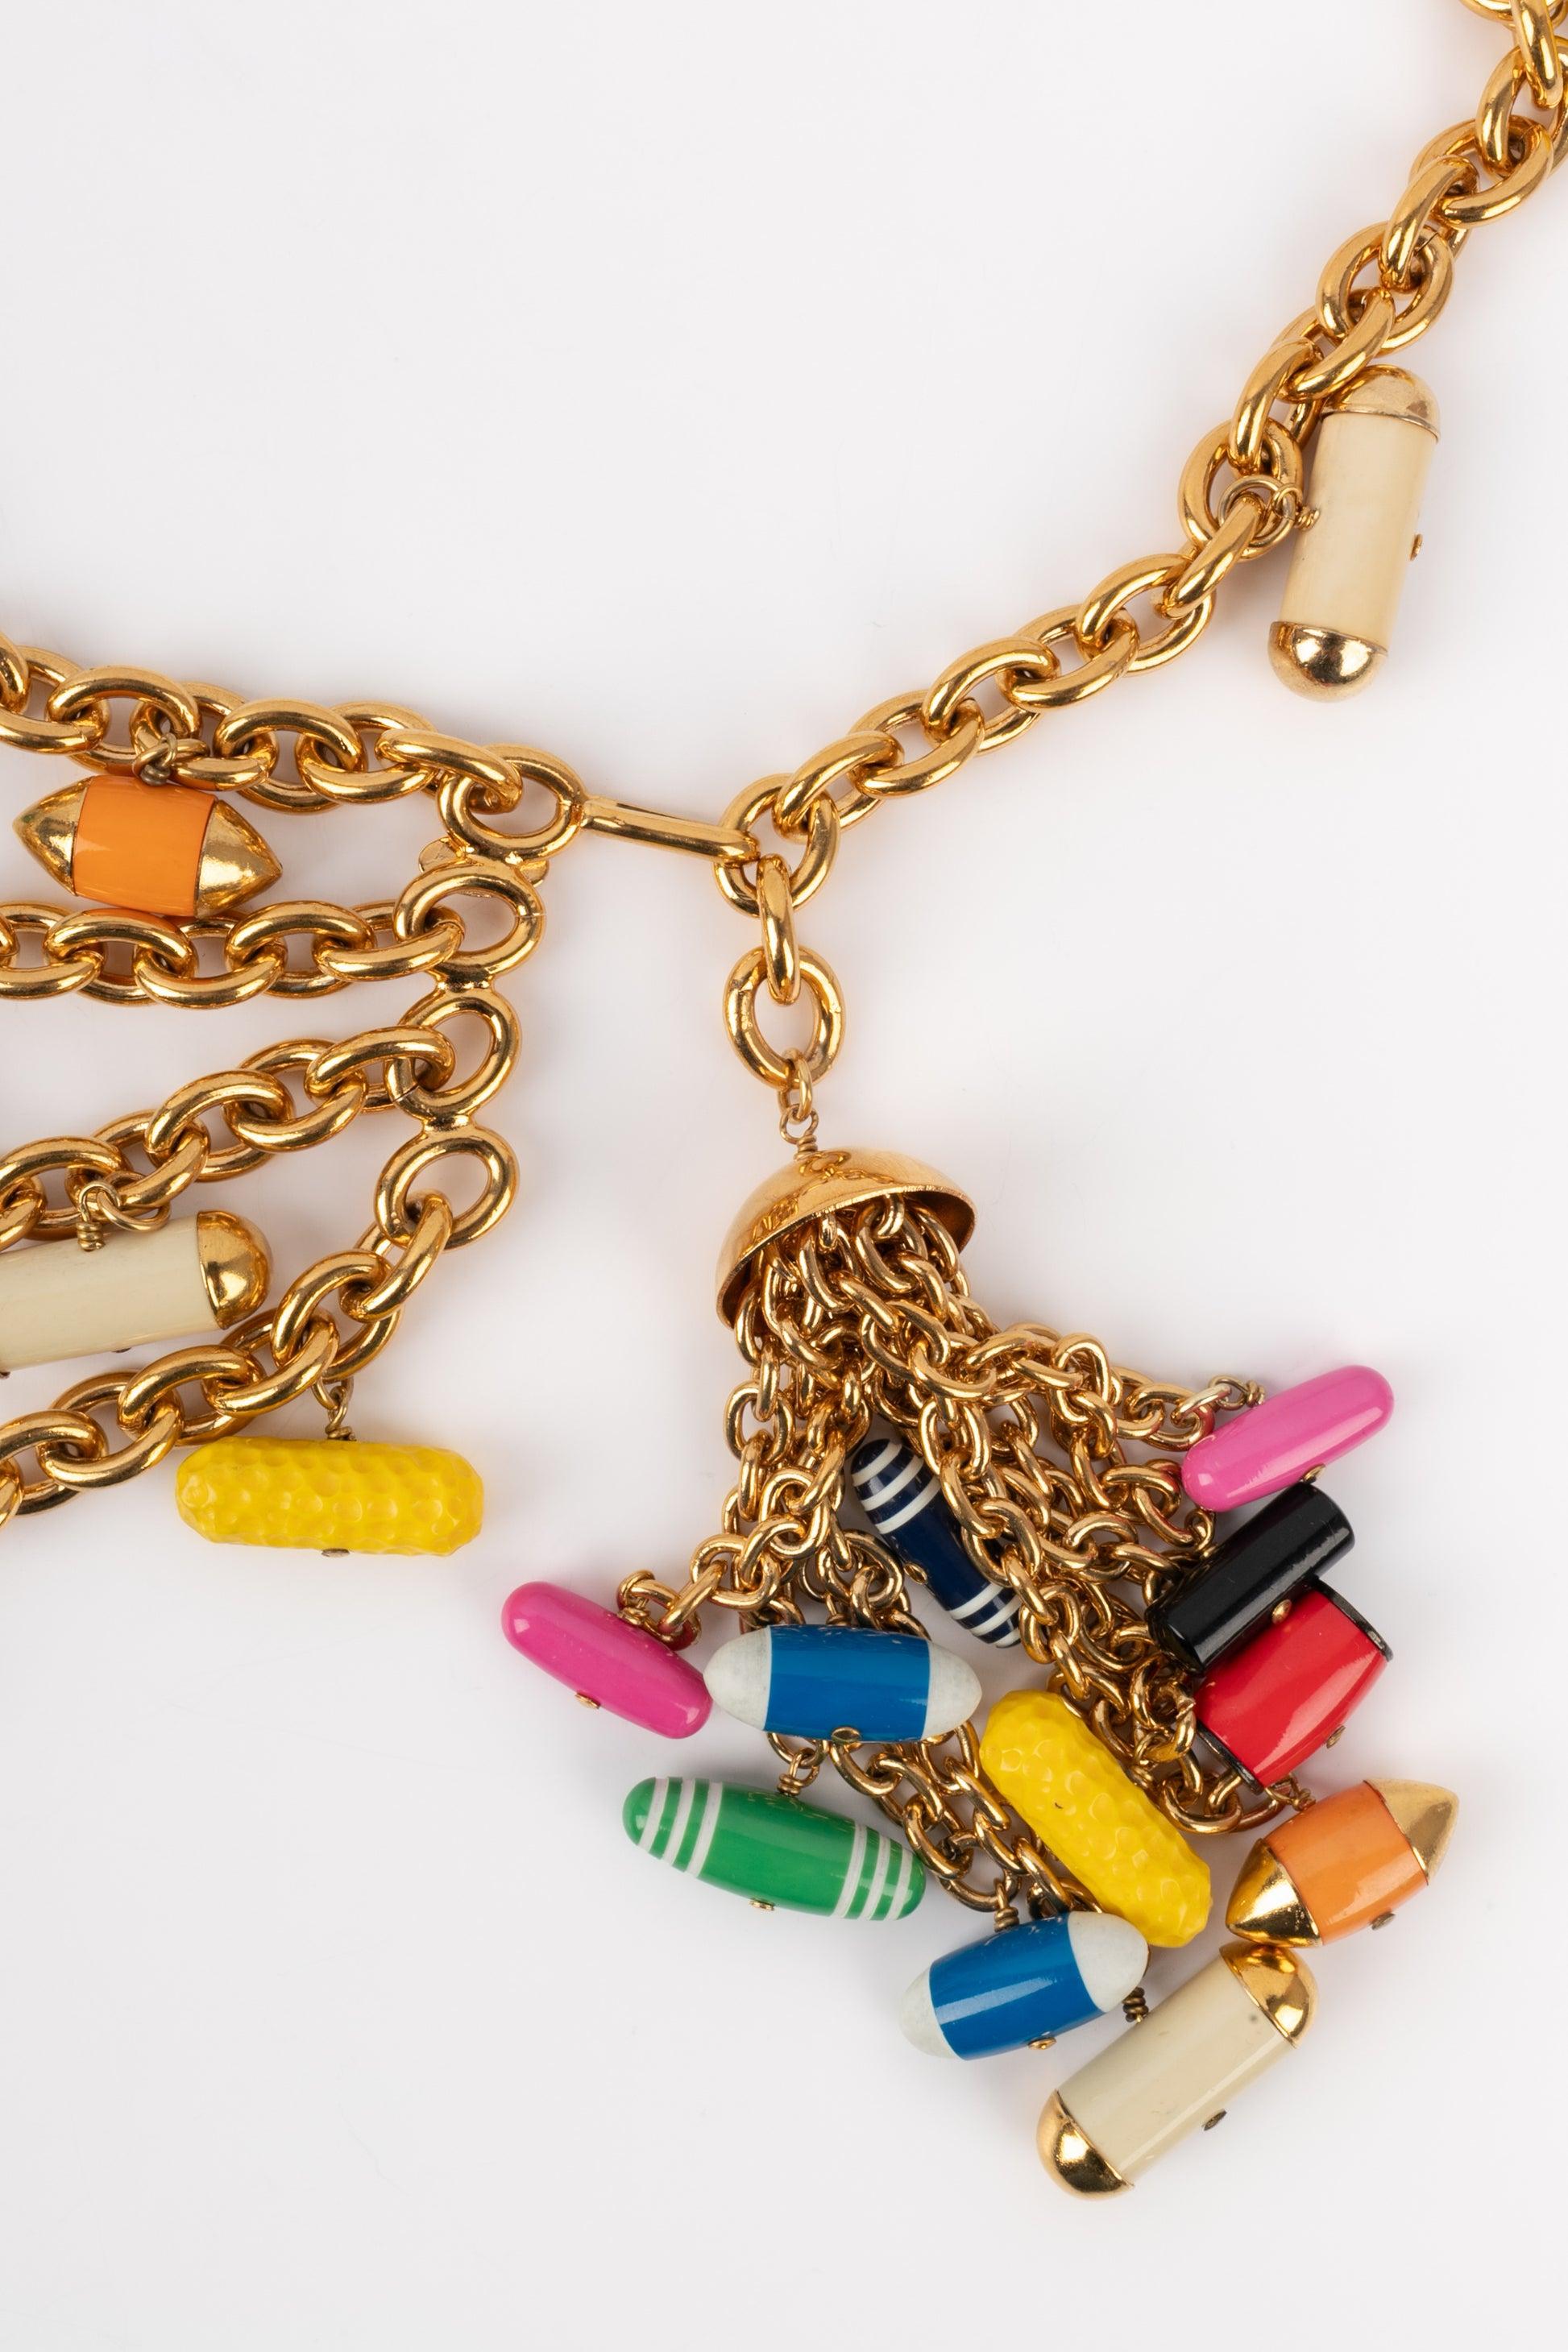 Chanel Golden Metal Belt Ornamented with Multicolored Resin Charms, 1992 For Sale 4